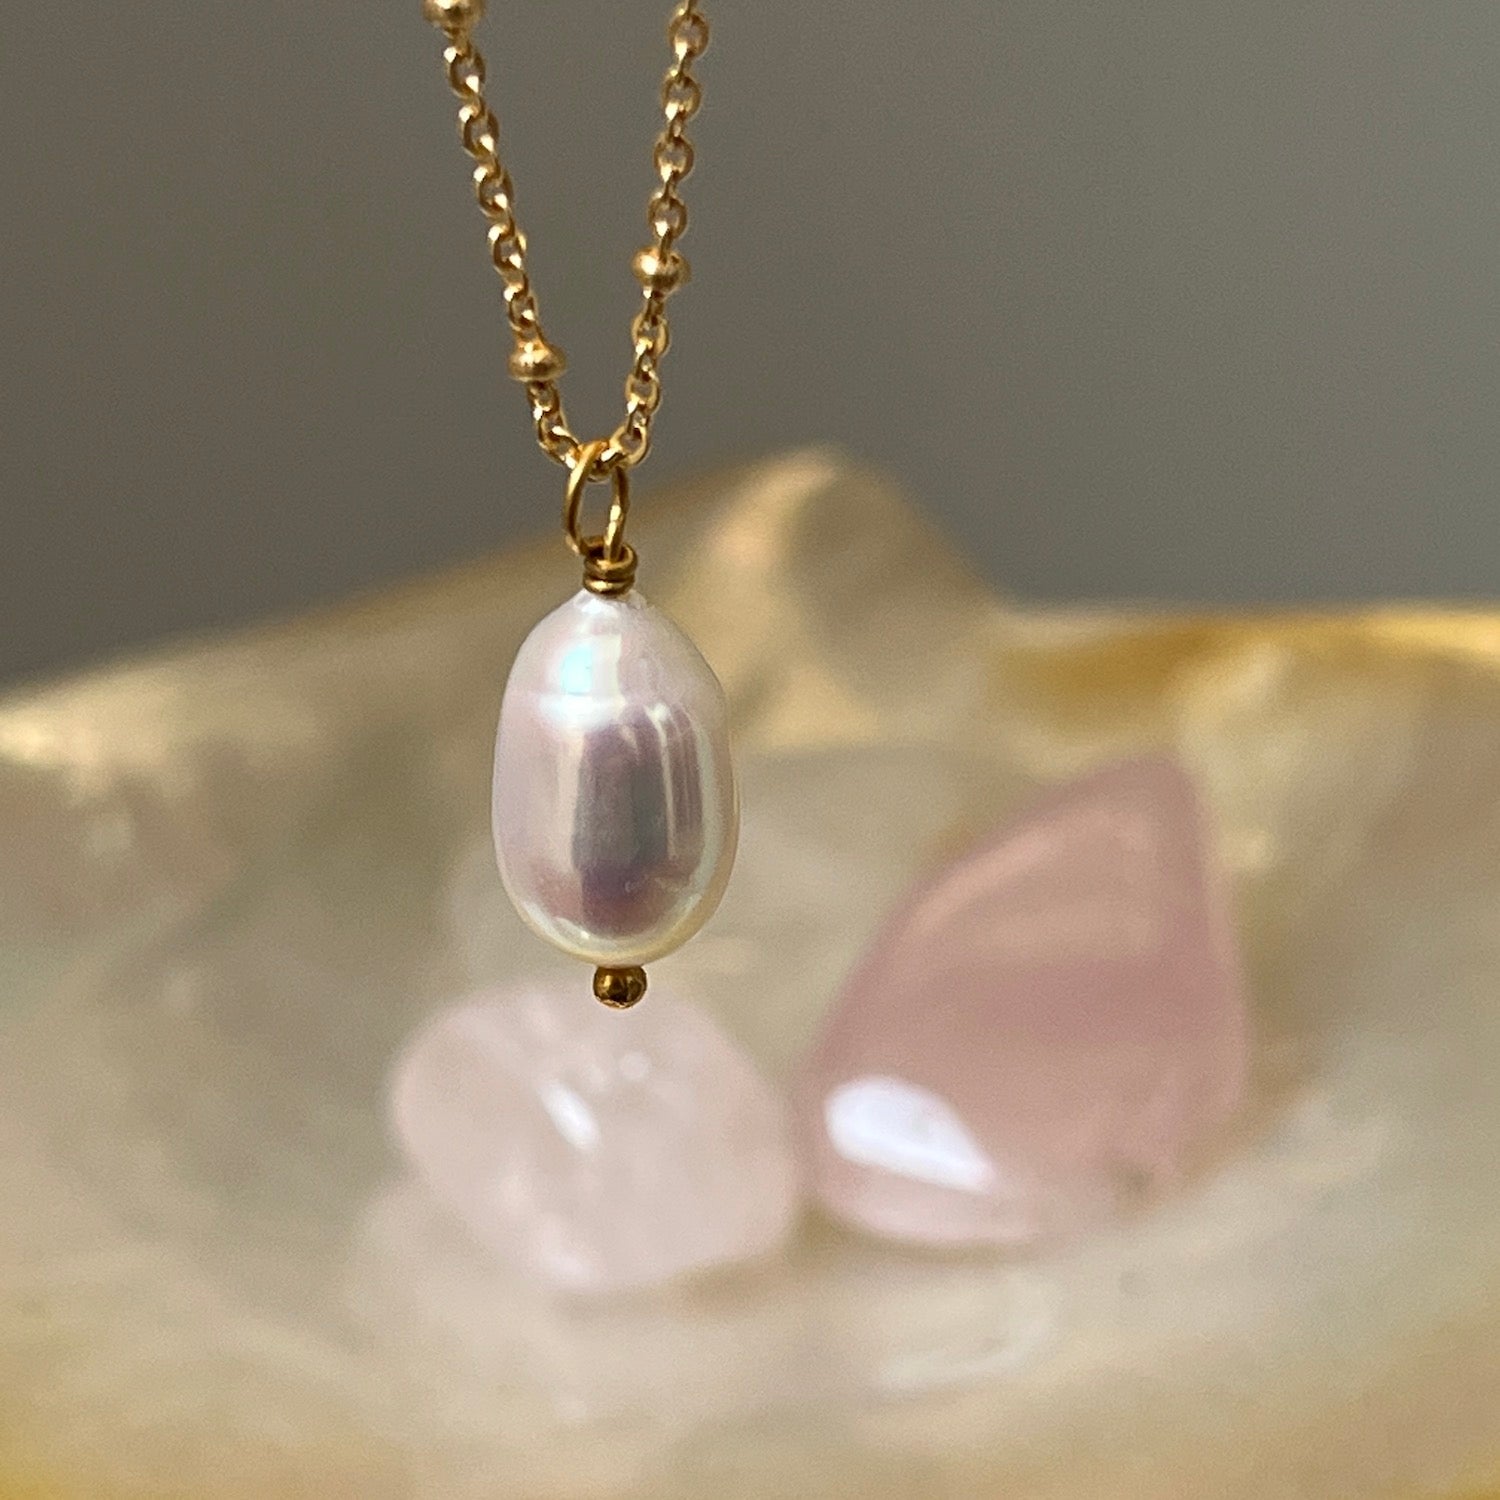 Diana freshwater Pearl on satellite chain